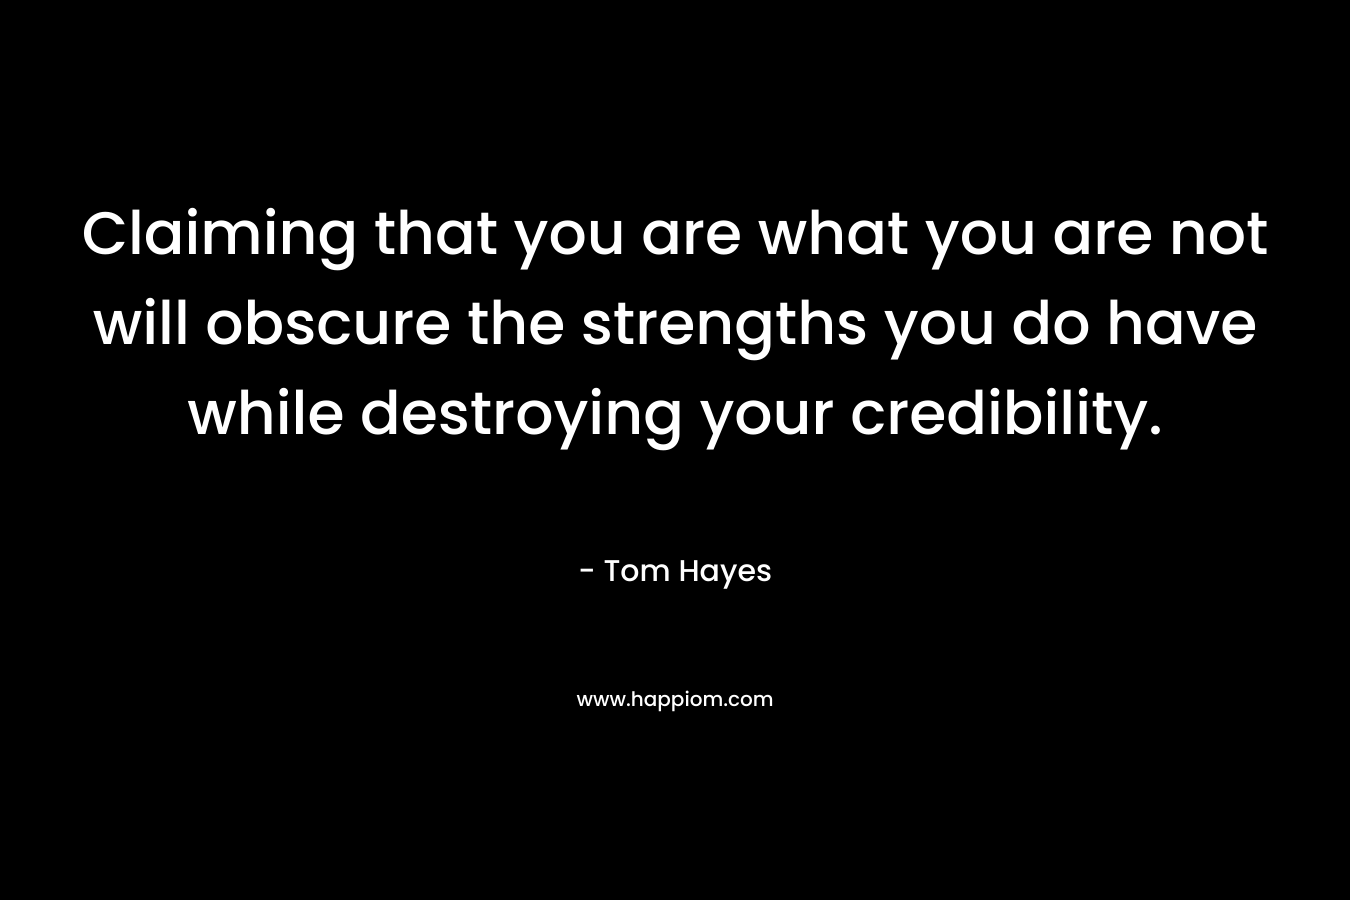 Claiming that you are what you are not will obscure the strengths you do have while destroying your credibility. – Tom Hayes